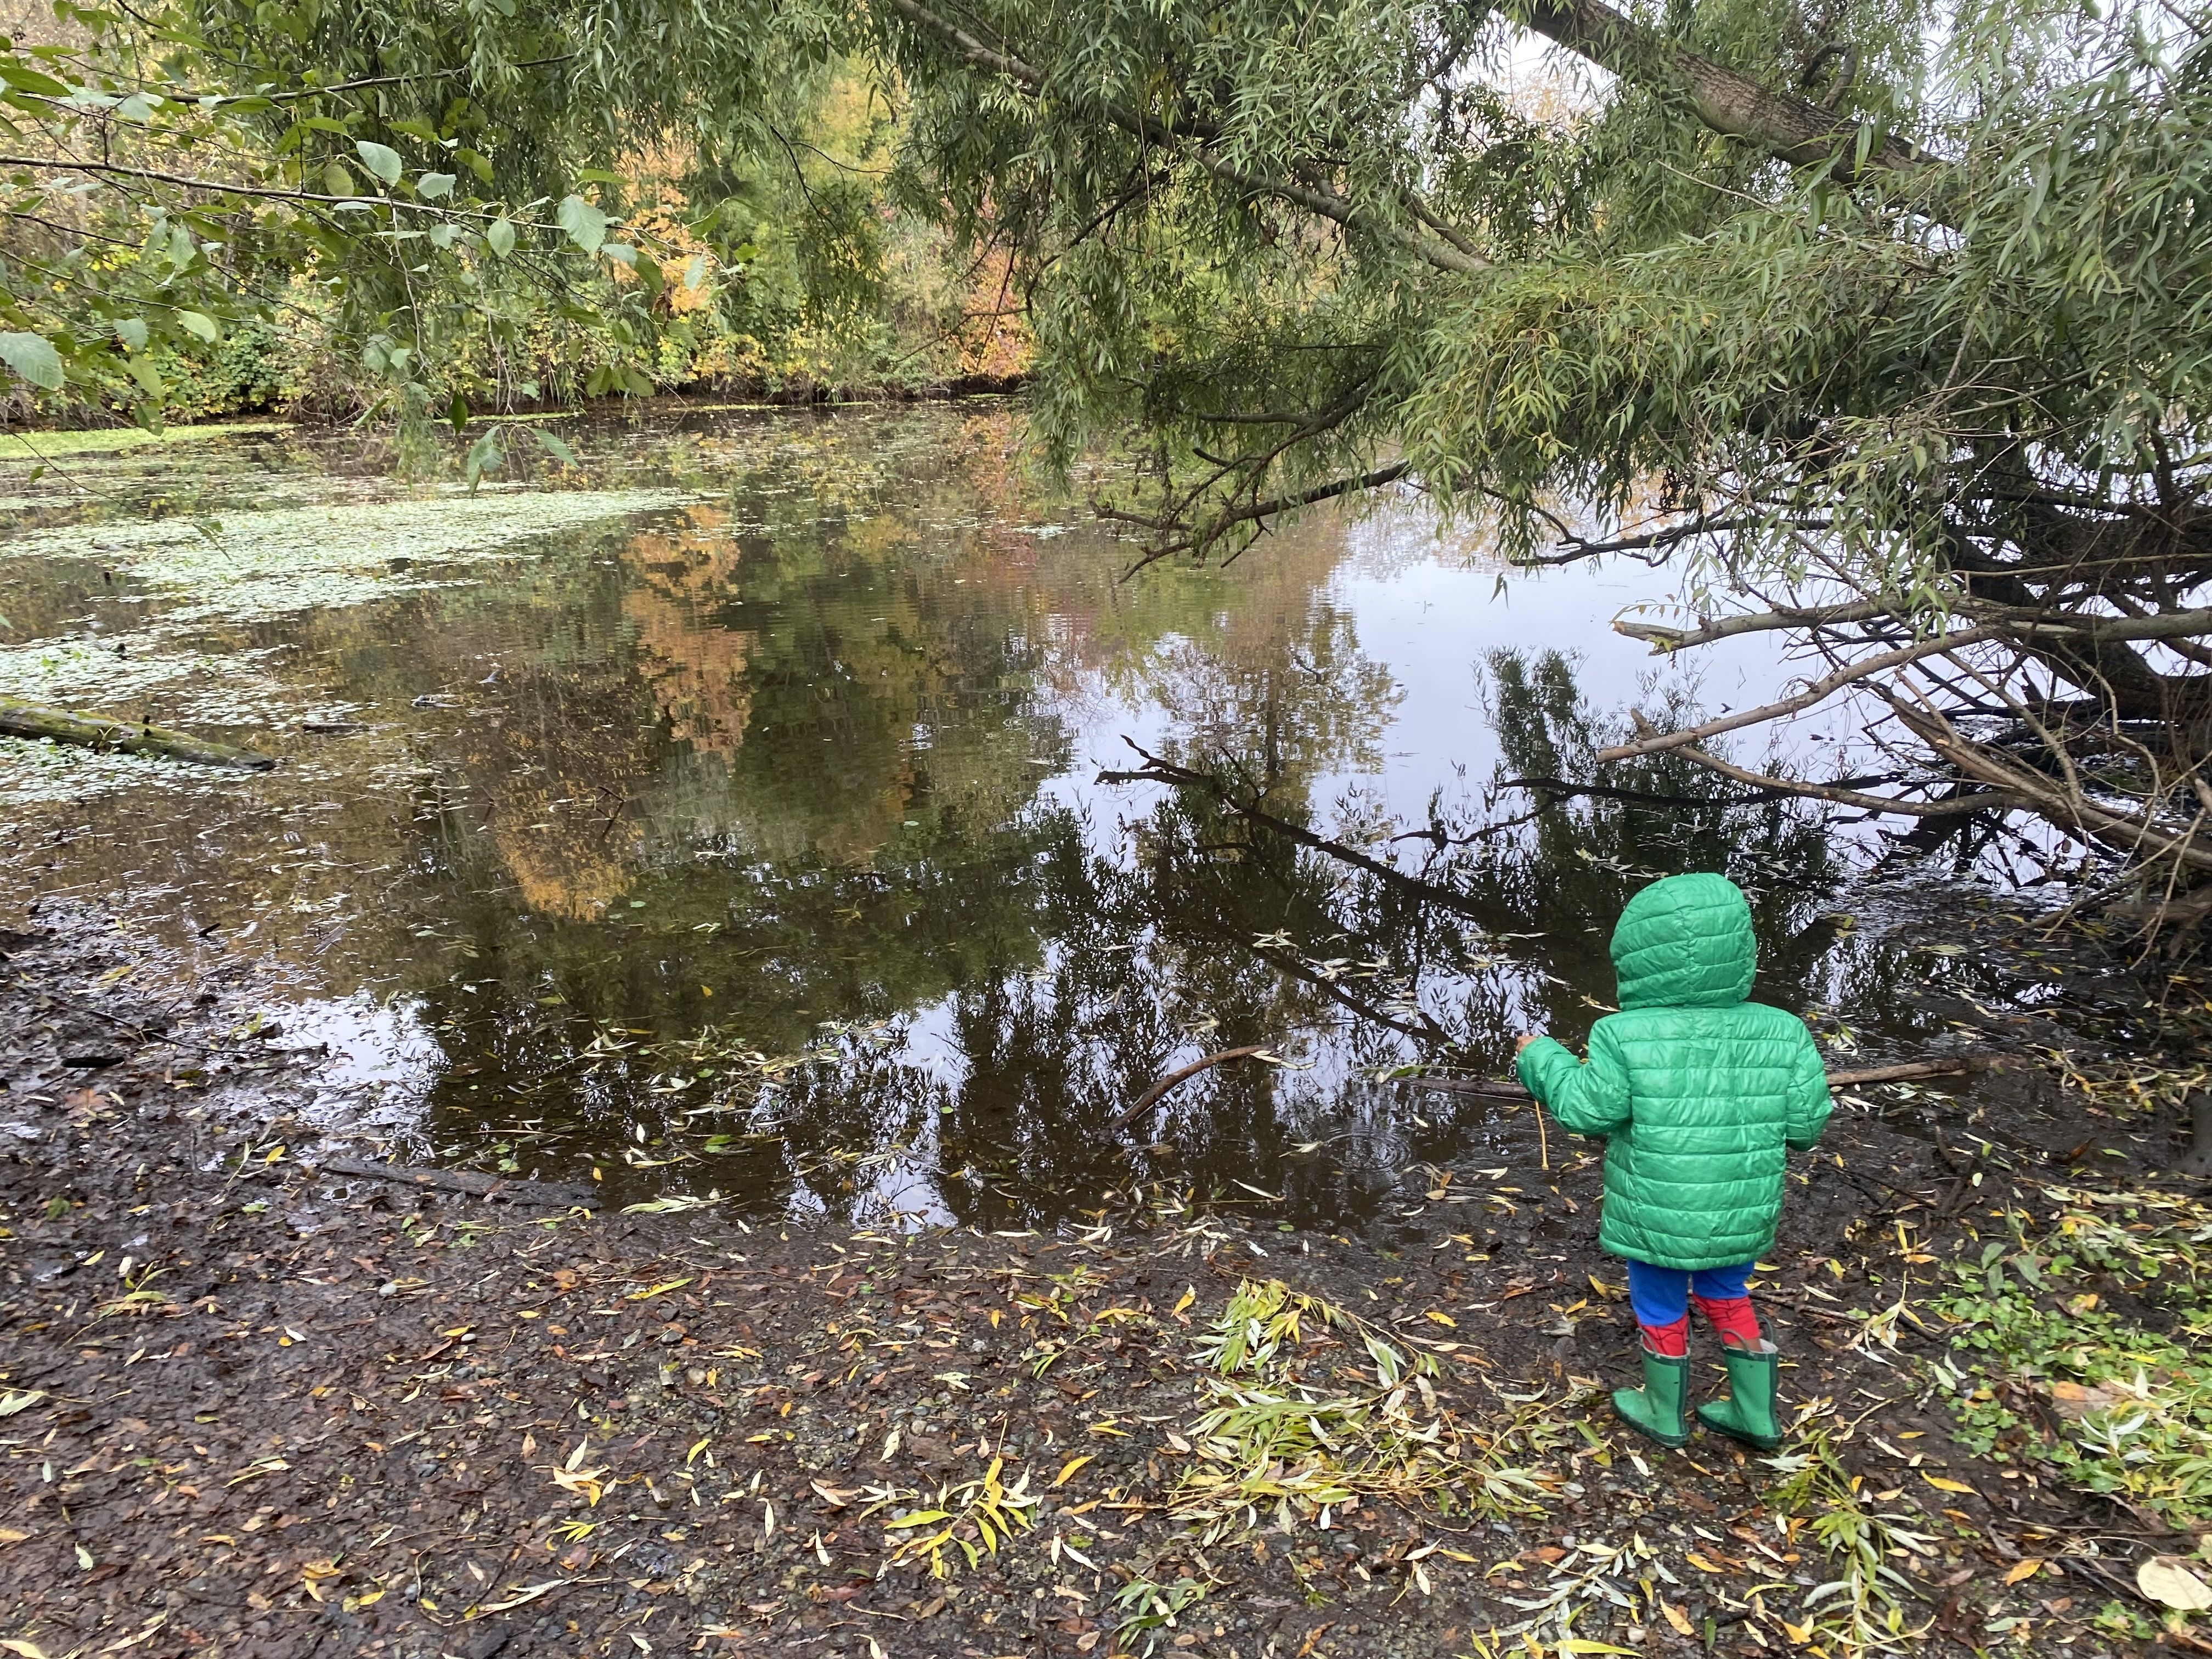 A little boy in a green coat and green boots stands at the edge of a body of water.